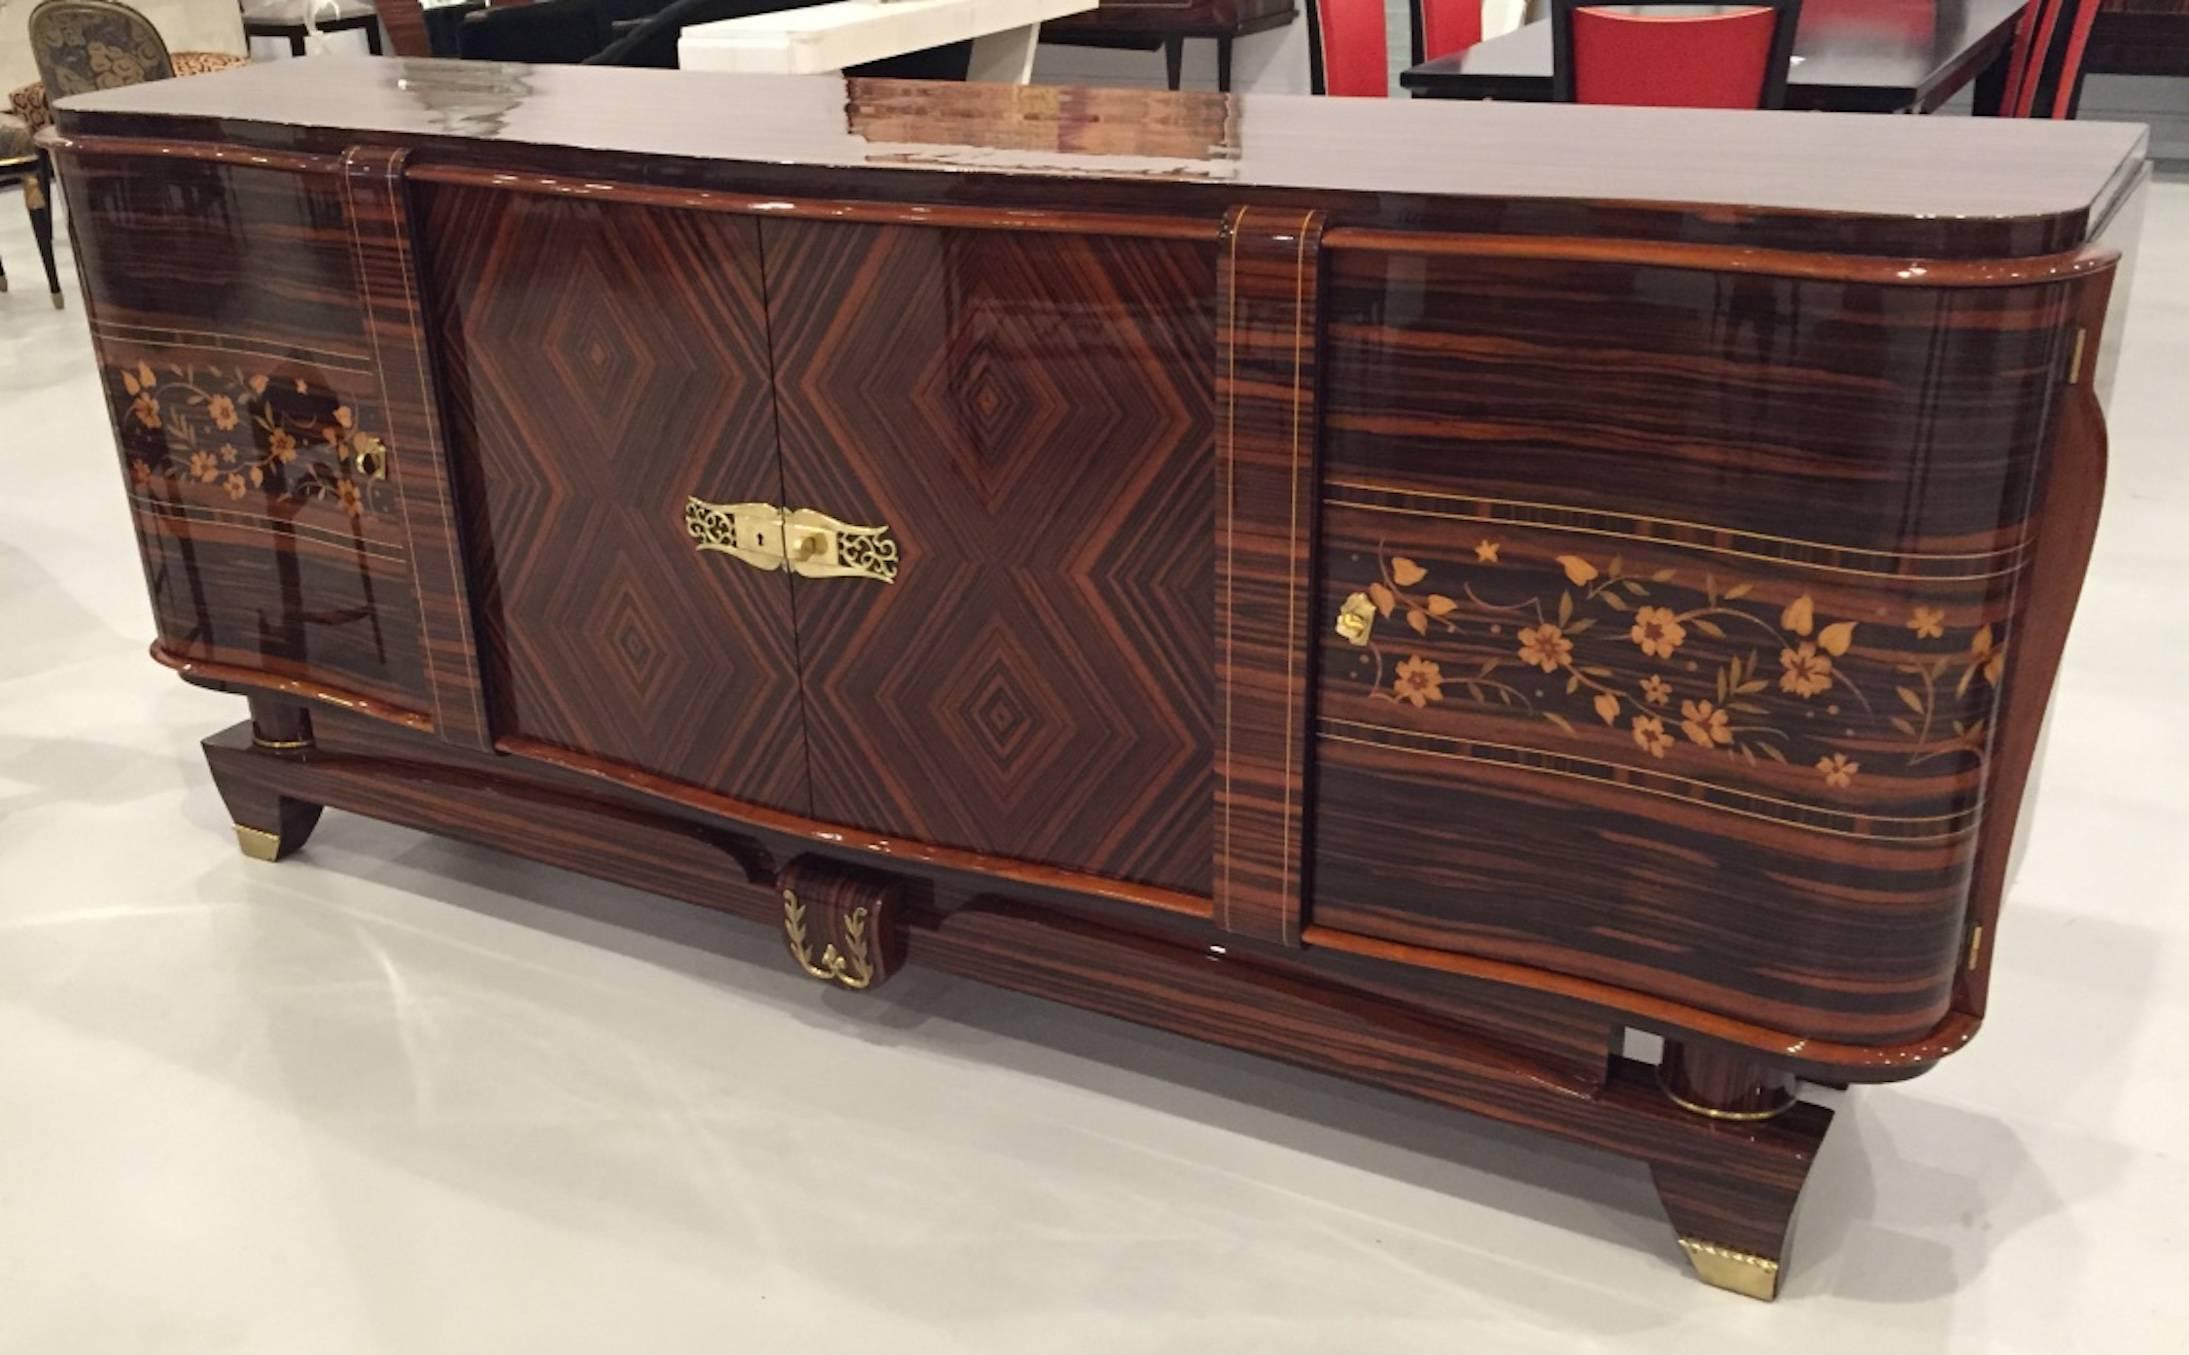 A spectacular French Art Deco Macassar “zigzag” buffet with geometric and floral motif. Having brass polished hardware that compliments the wood beautifully. Has been professionally restored with a high French finish. Perfect cradenza to add to your